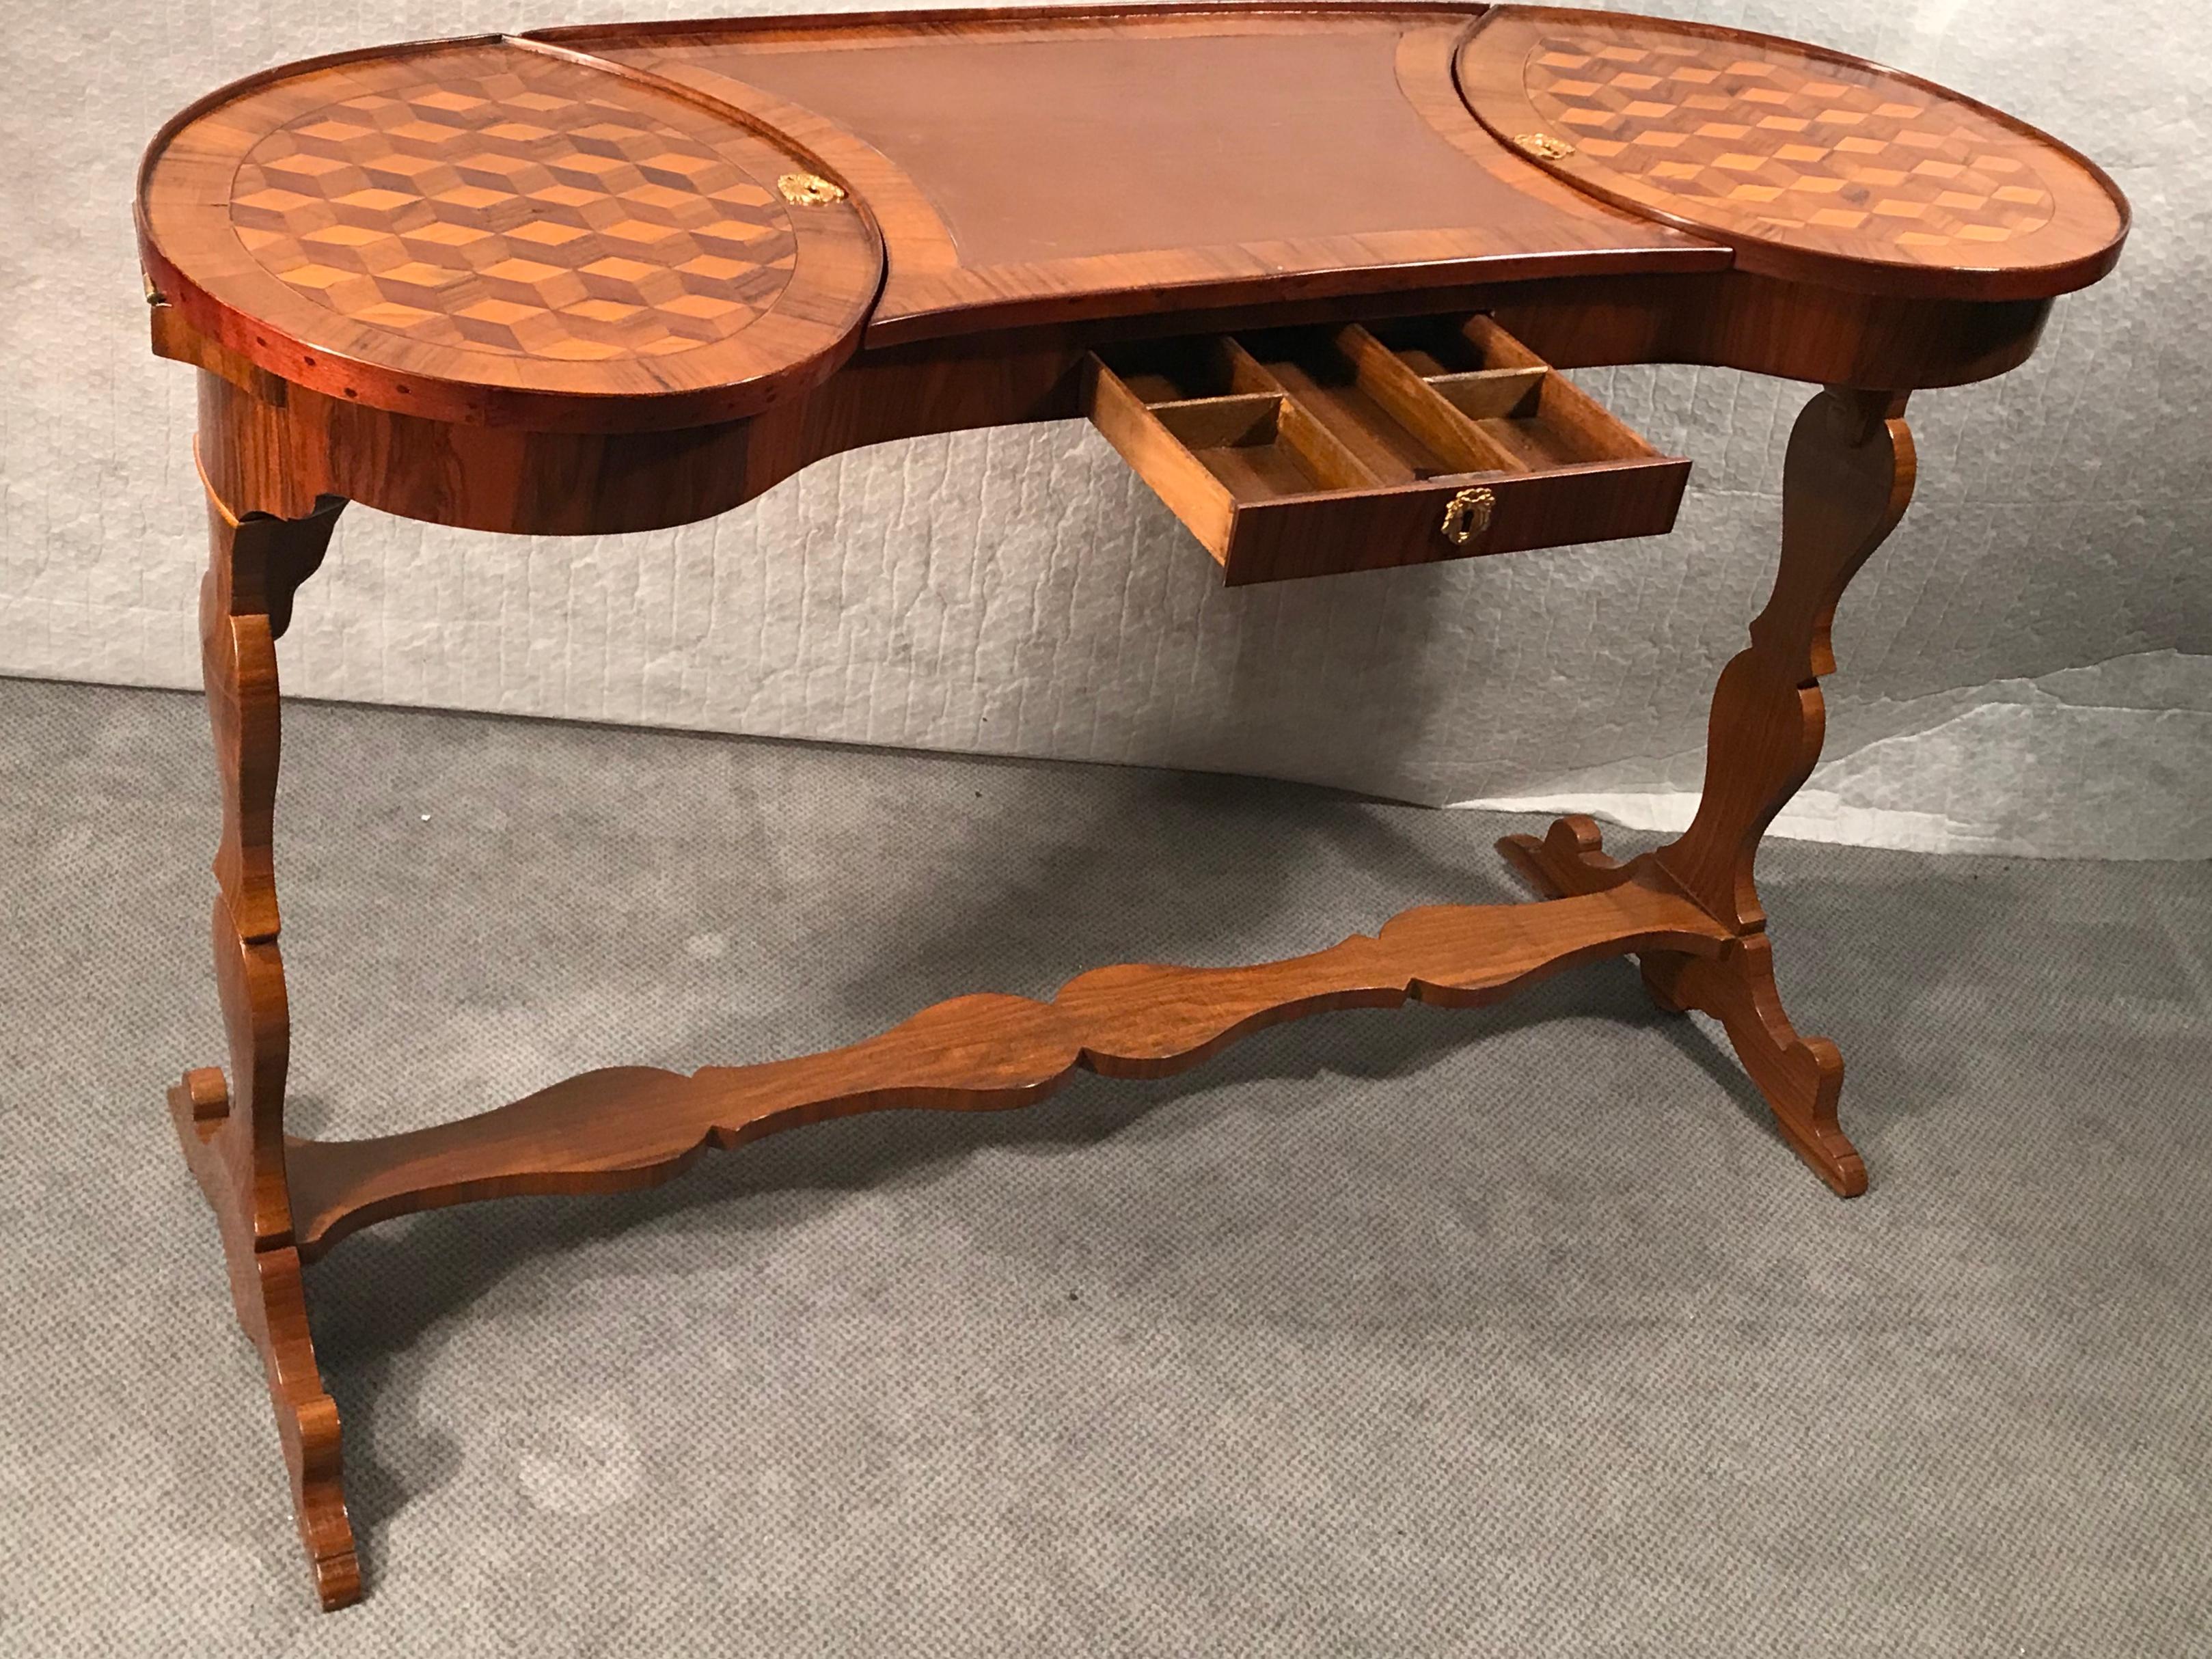 Exquisite and very unusual kidney shaped working table, France 1780, walnut, maple, plum wood veneer and marquetry. With a leather top and a flap on each side. One central drawer. Beautiful piece in very good original condition.